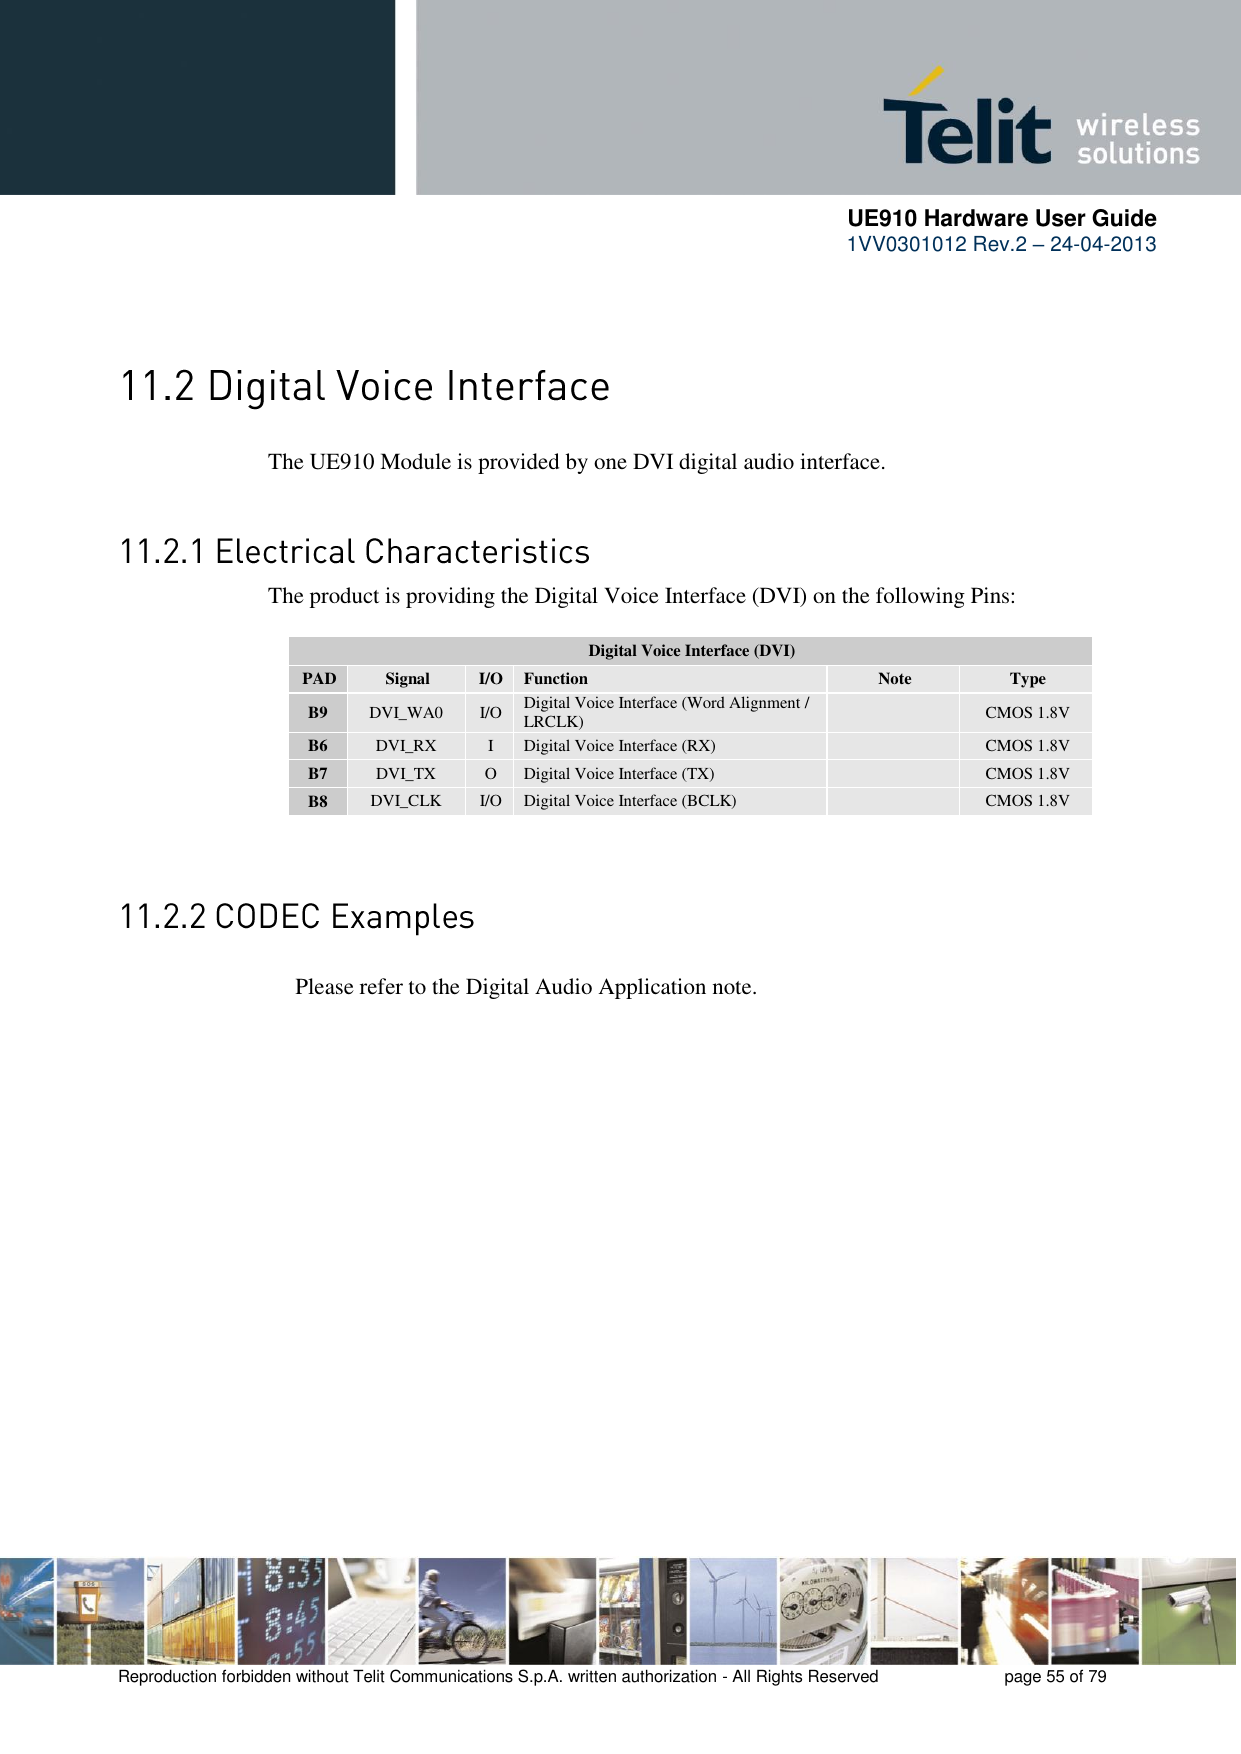      UE910 Hardware User Guide  1VV0301012 Rev.2 – 24-04-2013    Reproduction forbidden without Telit Communications S.p.A. written authorization - All Rights Reserved    page 55 of 79     The UE910 Module is provided by one DVI digital audio interface.  The product is providing the Digital Voice Interface (DVI) on the following Pins:  Digital Voice Interface (DVI) PAD Signal I/O Function Note Type B9 DVI_WA0 I/O Digital Voice Interface (Word Alignment / LRCLK)  CMOS 1.8V B6 DVI_RX I Digital Voice Interface (RX)  CMOS 1.8V B7 DVI_TX O Digital Voice Interface (TX)  CMOS 1.8V B8 DVI_CLK I/O Digital Voice Interface (BCLK)  CMOS 1.8V      Please refer to the Digital Audio Application note. 